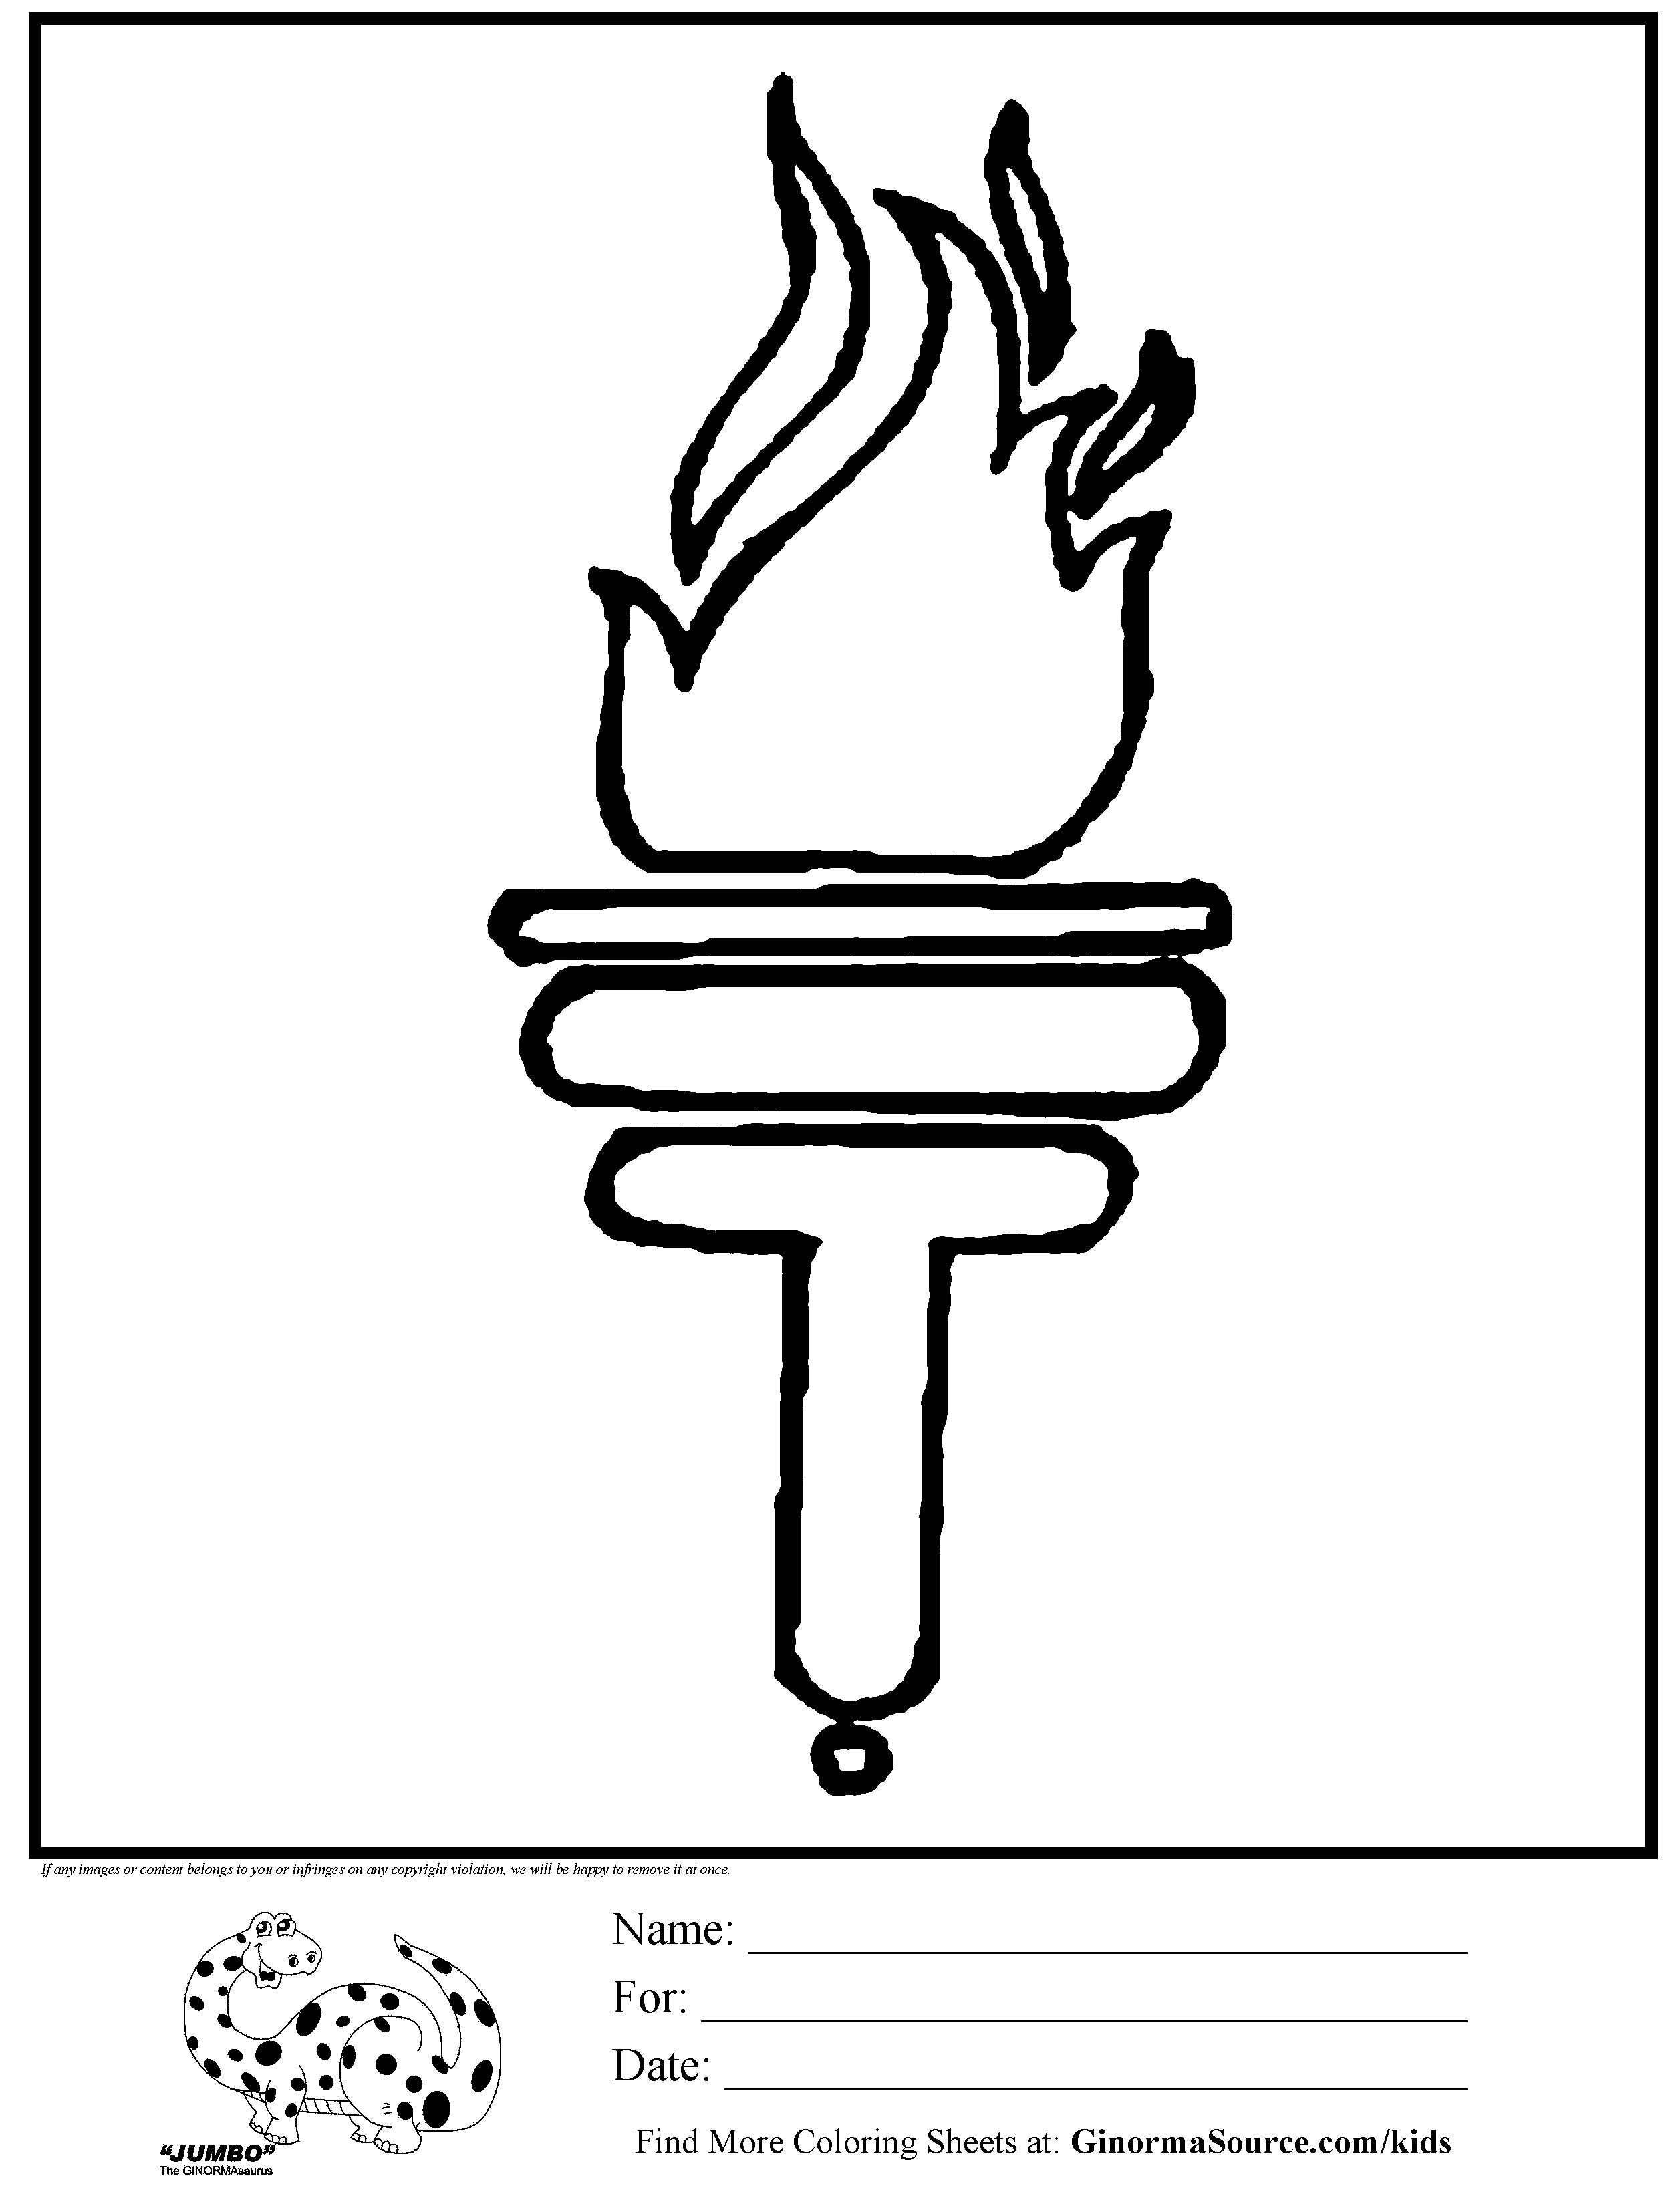 Torch coloring #9, Download drawings